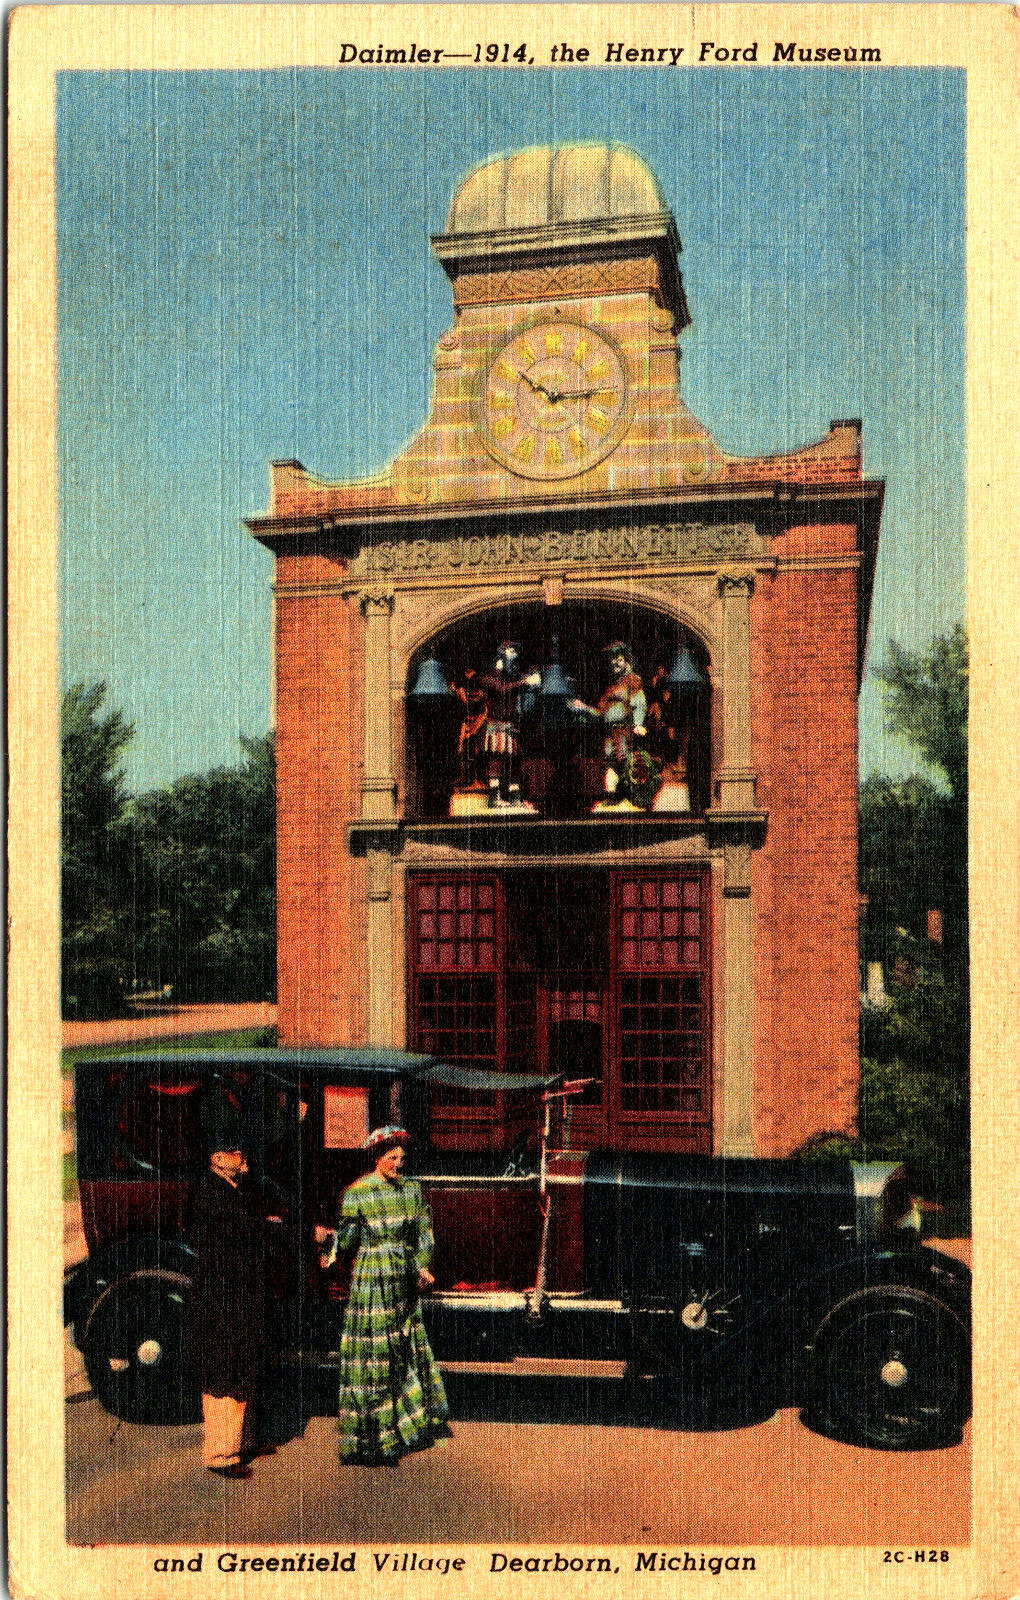 US DAIMLER 1912 CLASSIC CAR HENRY FORD MUSEUM MICHIGAN POSTCARD DEARBORN MICH